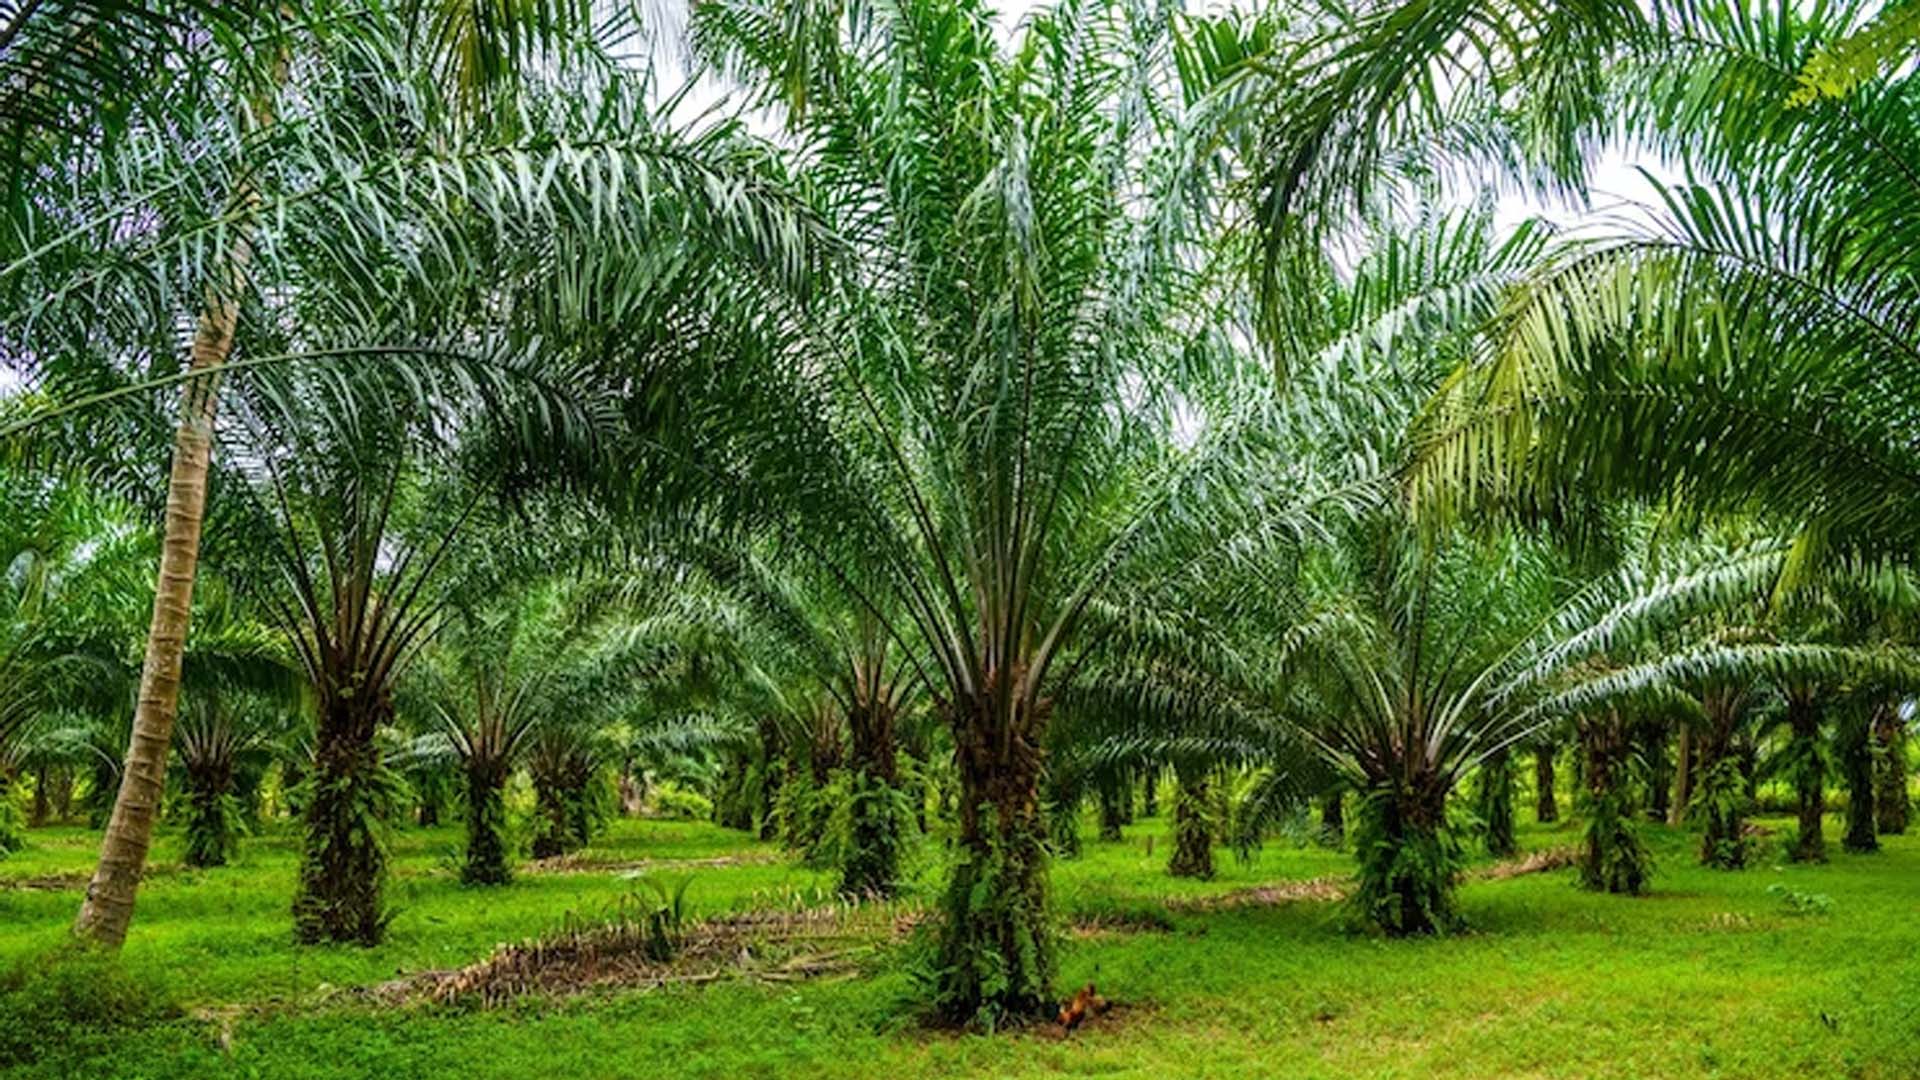 Health Benefits of Palm Oil